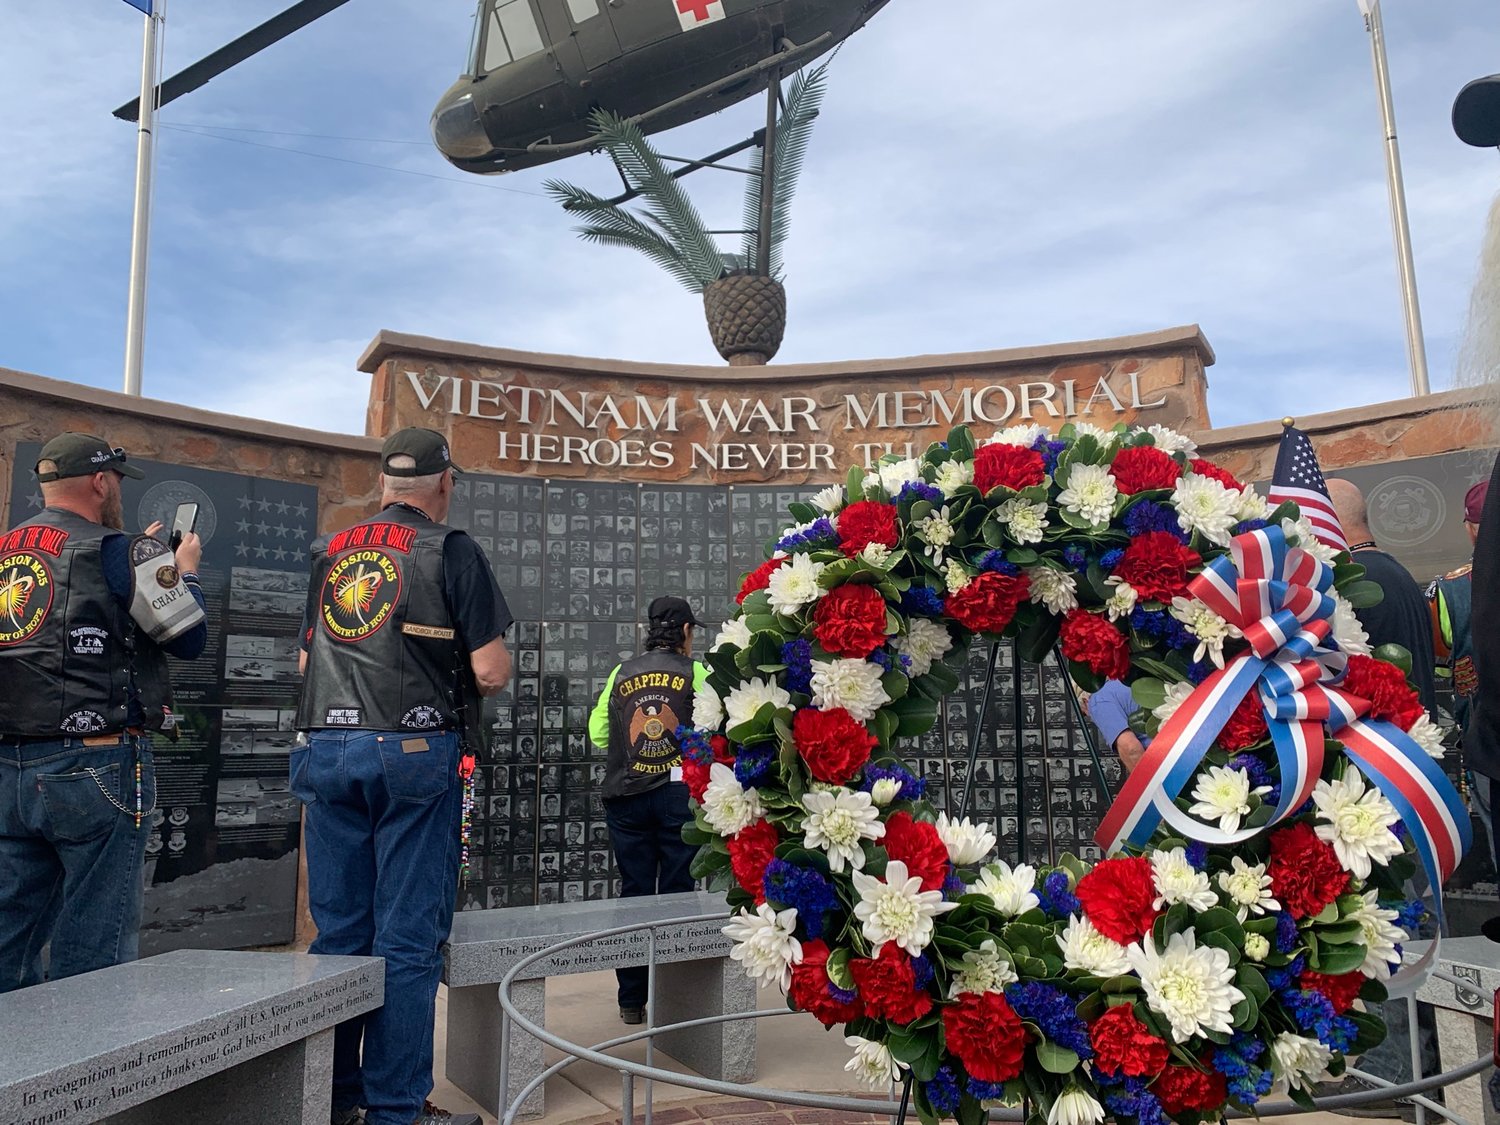 The Run for the Wall cross-country motorcycle run comes through Las Cruces Friday, May 20, and stops to participate in a wreath laying ceremony at the Vietnam Veterans Memorial at Las Cruces Veterans Park.